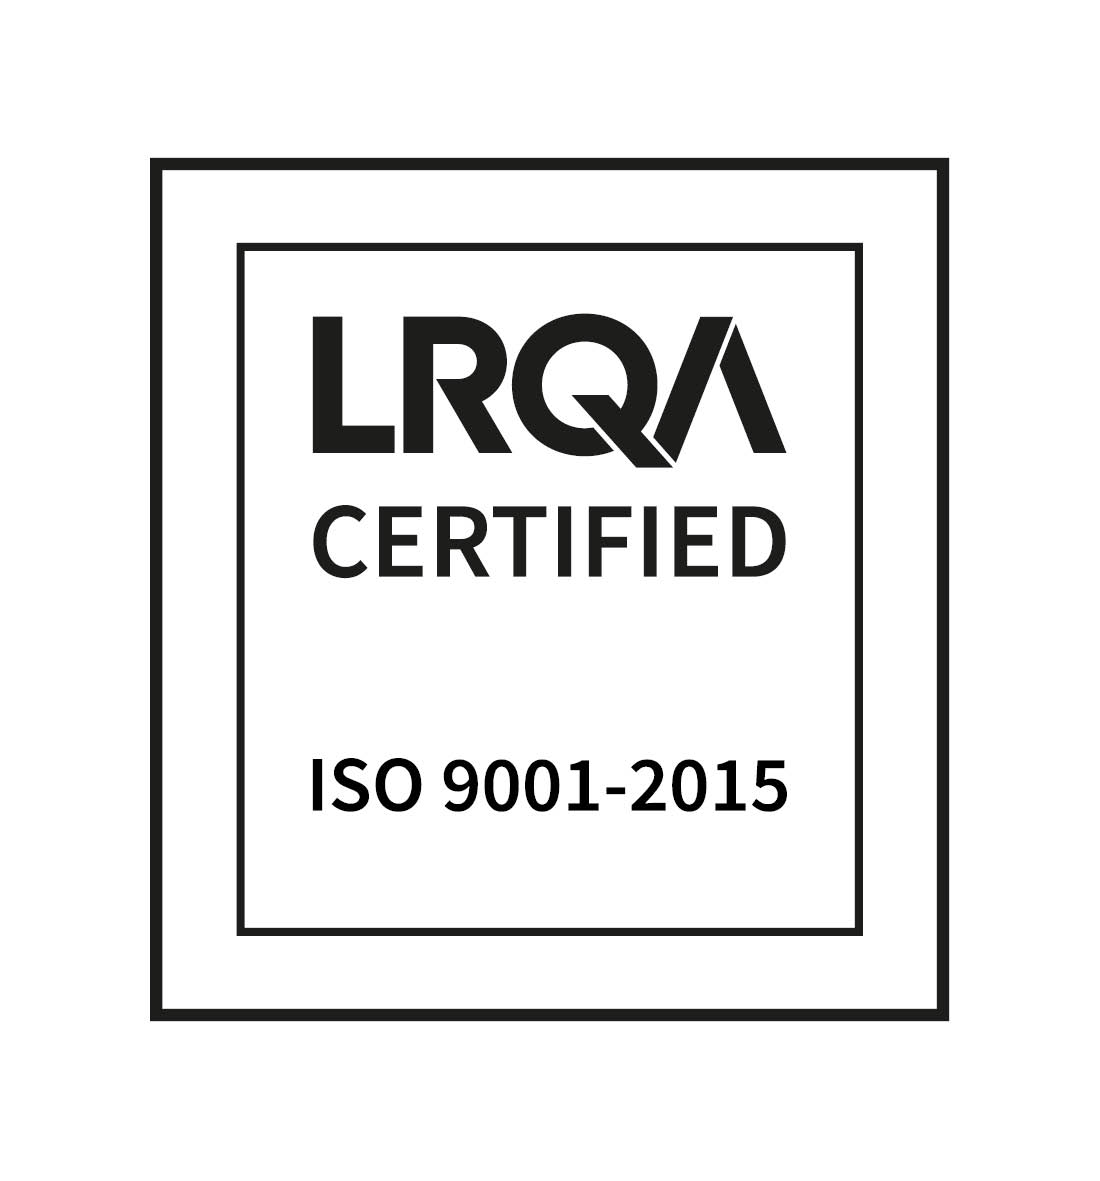 LRQA ISO 9001-2015 Certificate